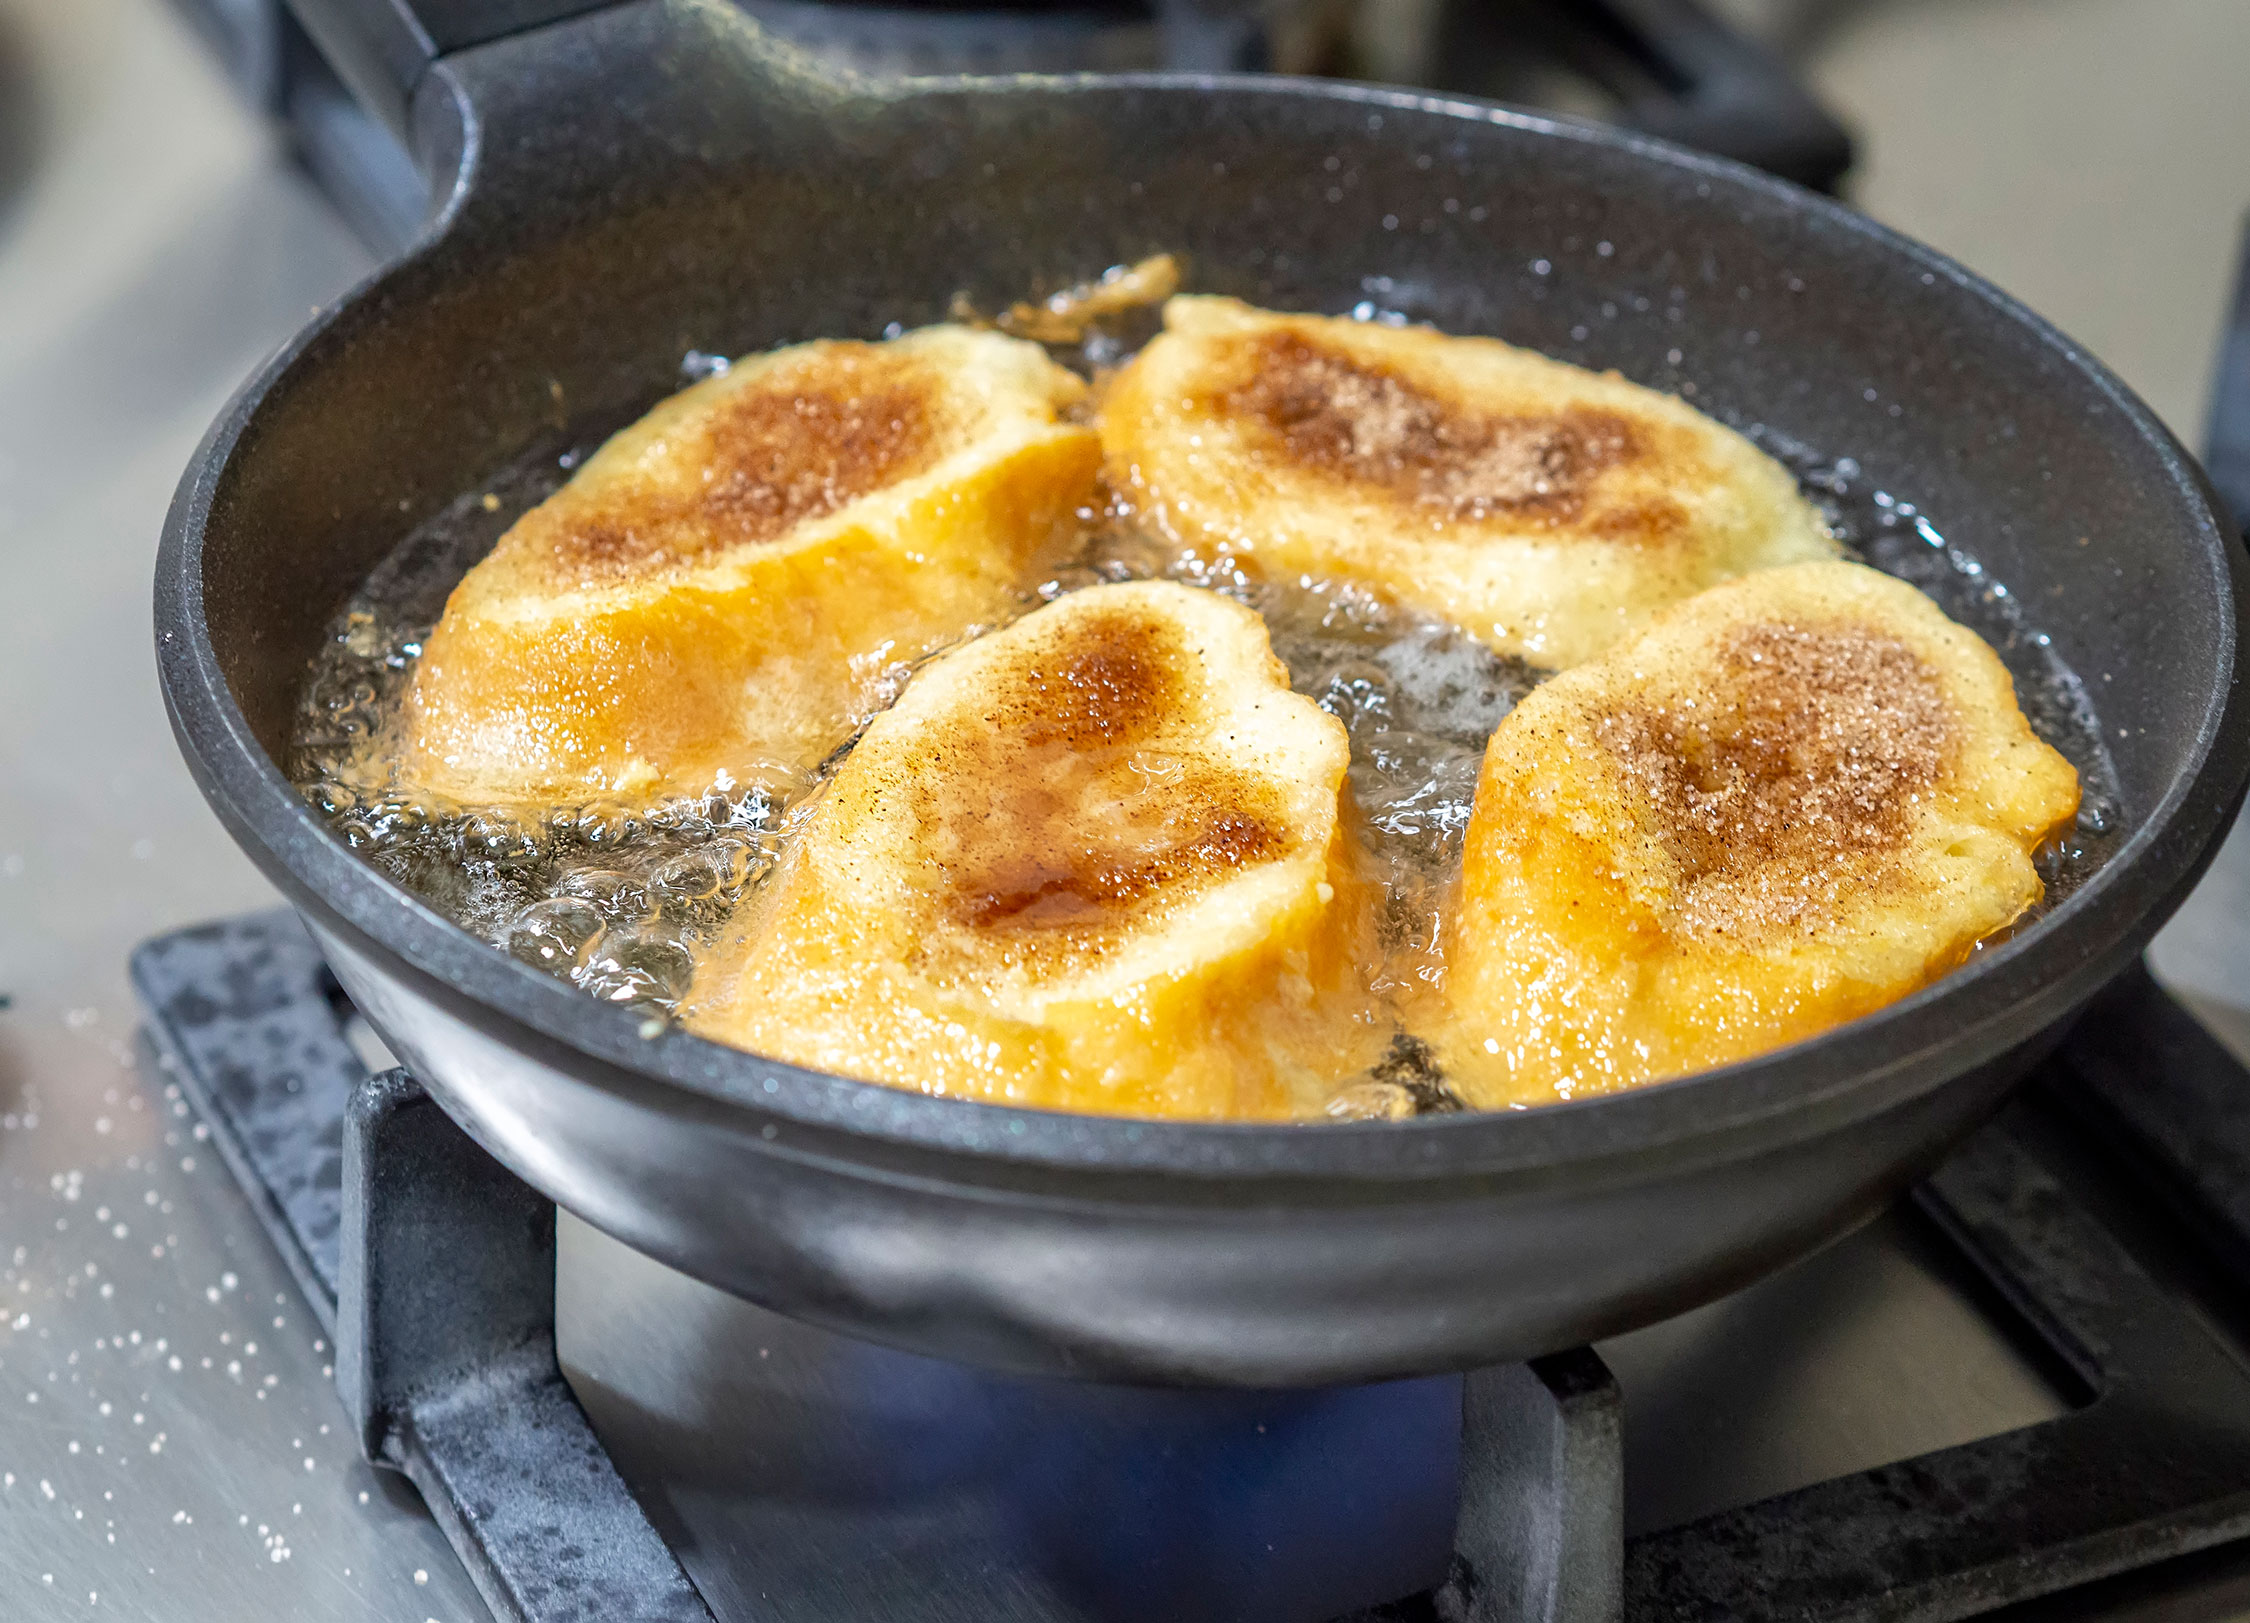 How to eat torrijas, war or cold? As you like, they are a delicious treat!